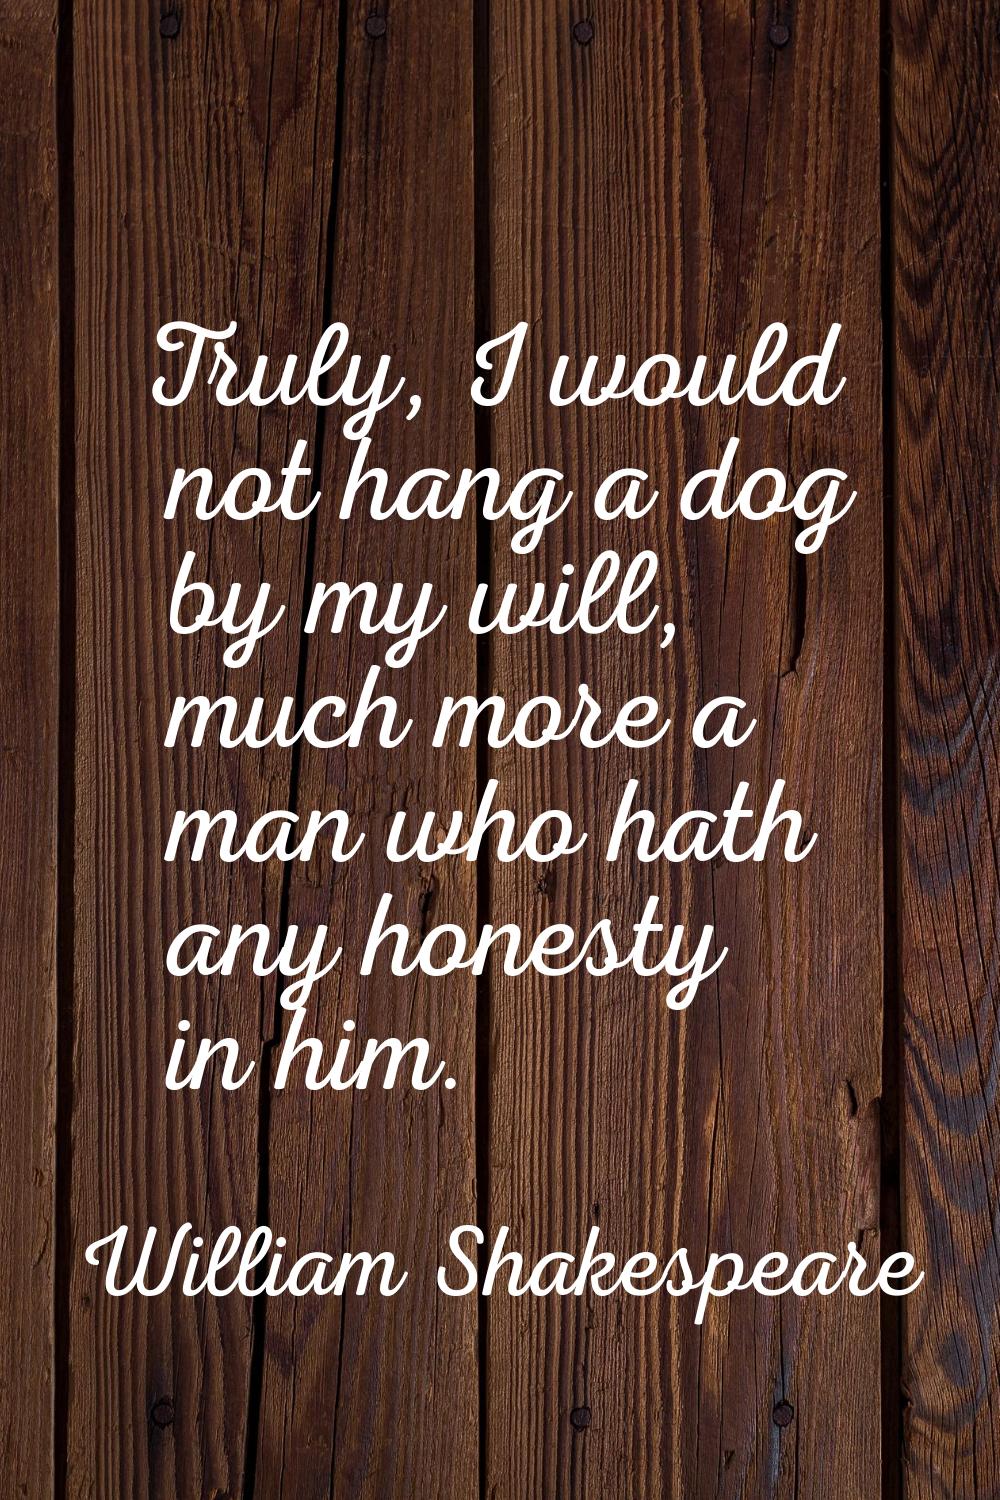 Truly, I would not hang a dog by my will, much more a man who hath any honesty in him.